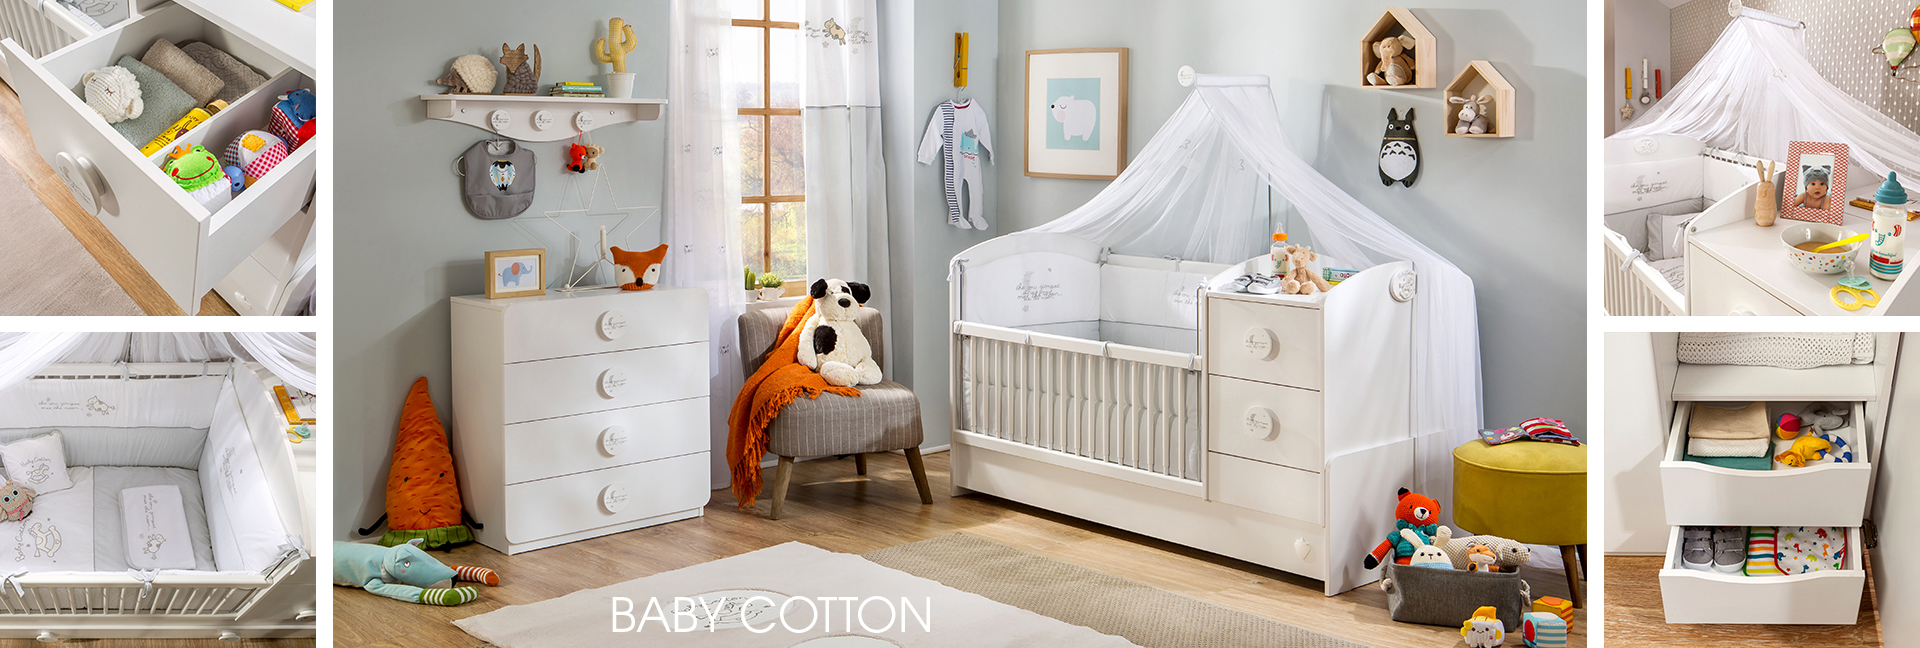 baby_cotton_banner_text